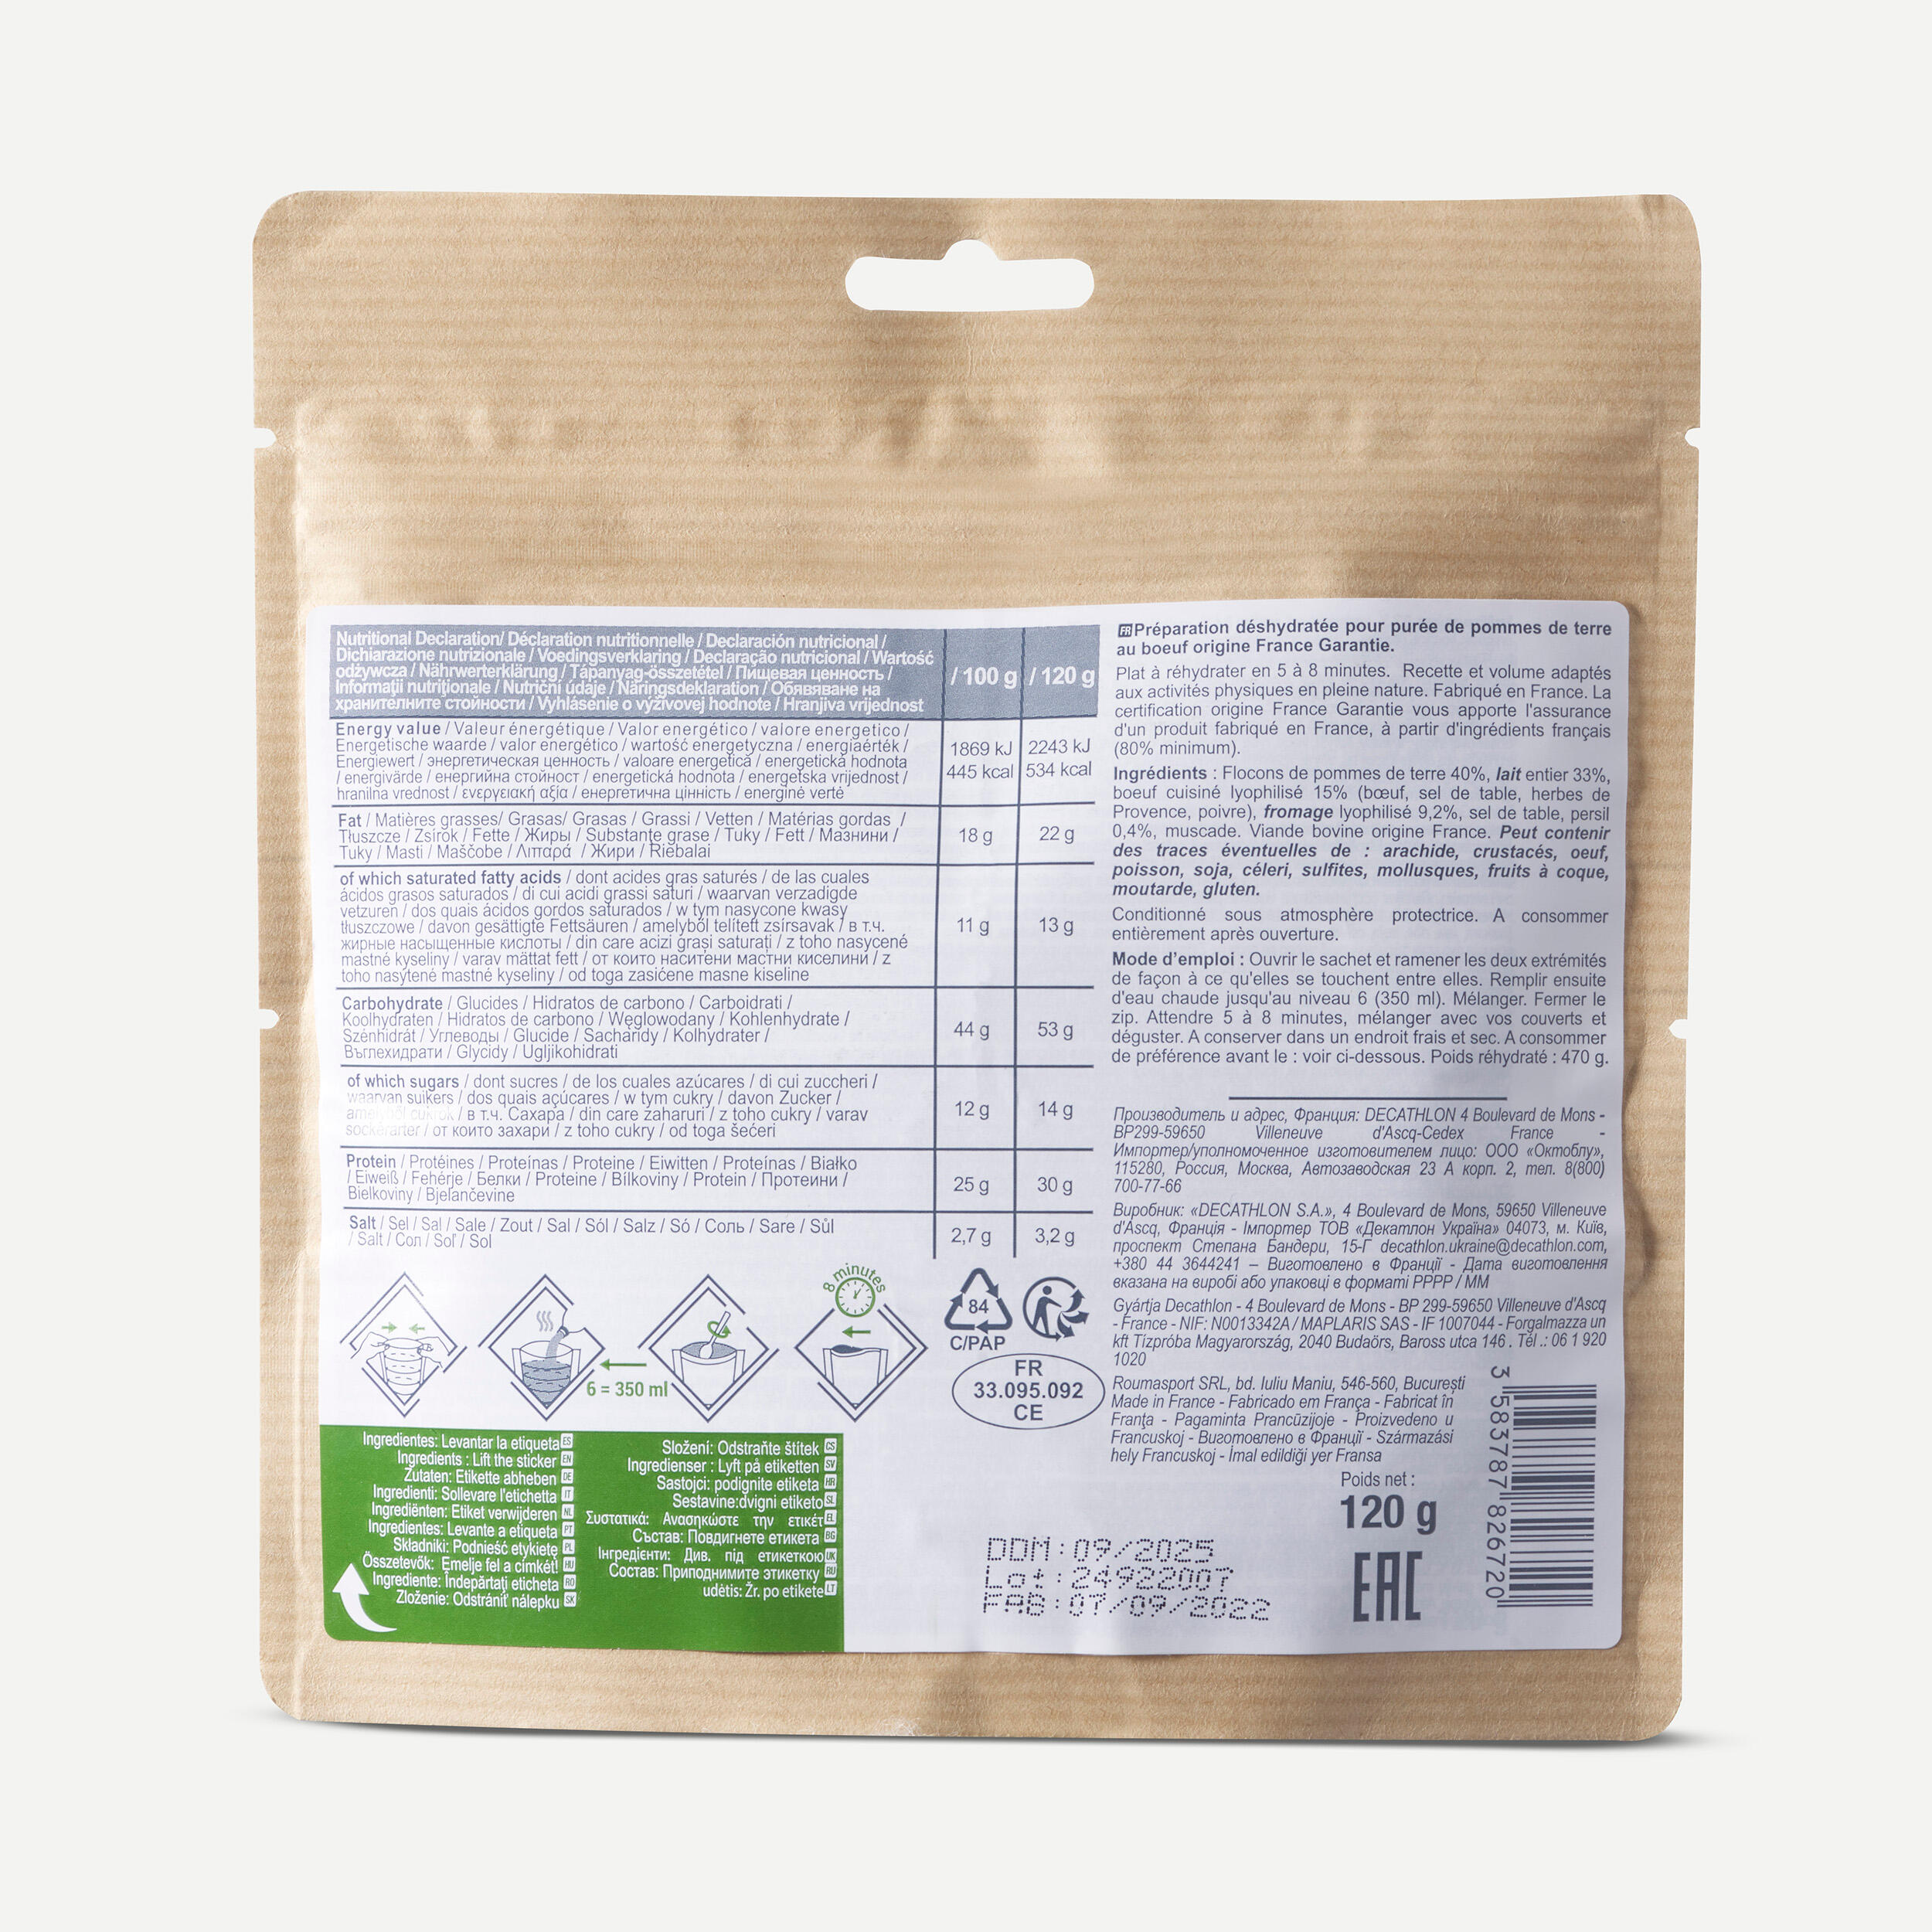 Beef and Mash Dehydrated Meal 120g 4/5